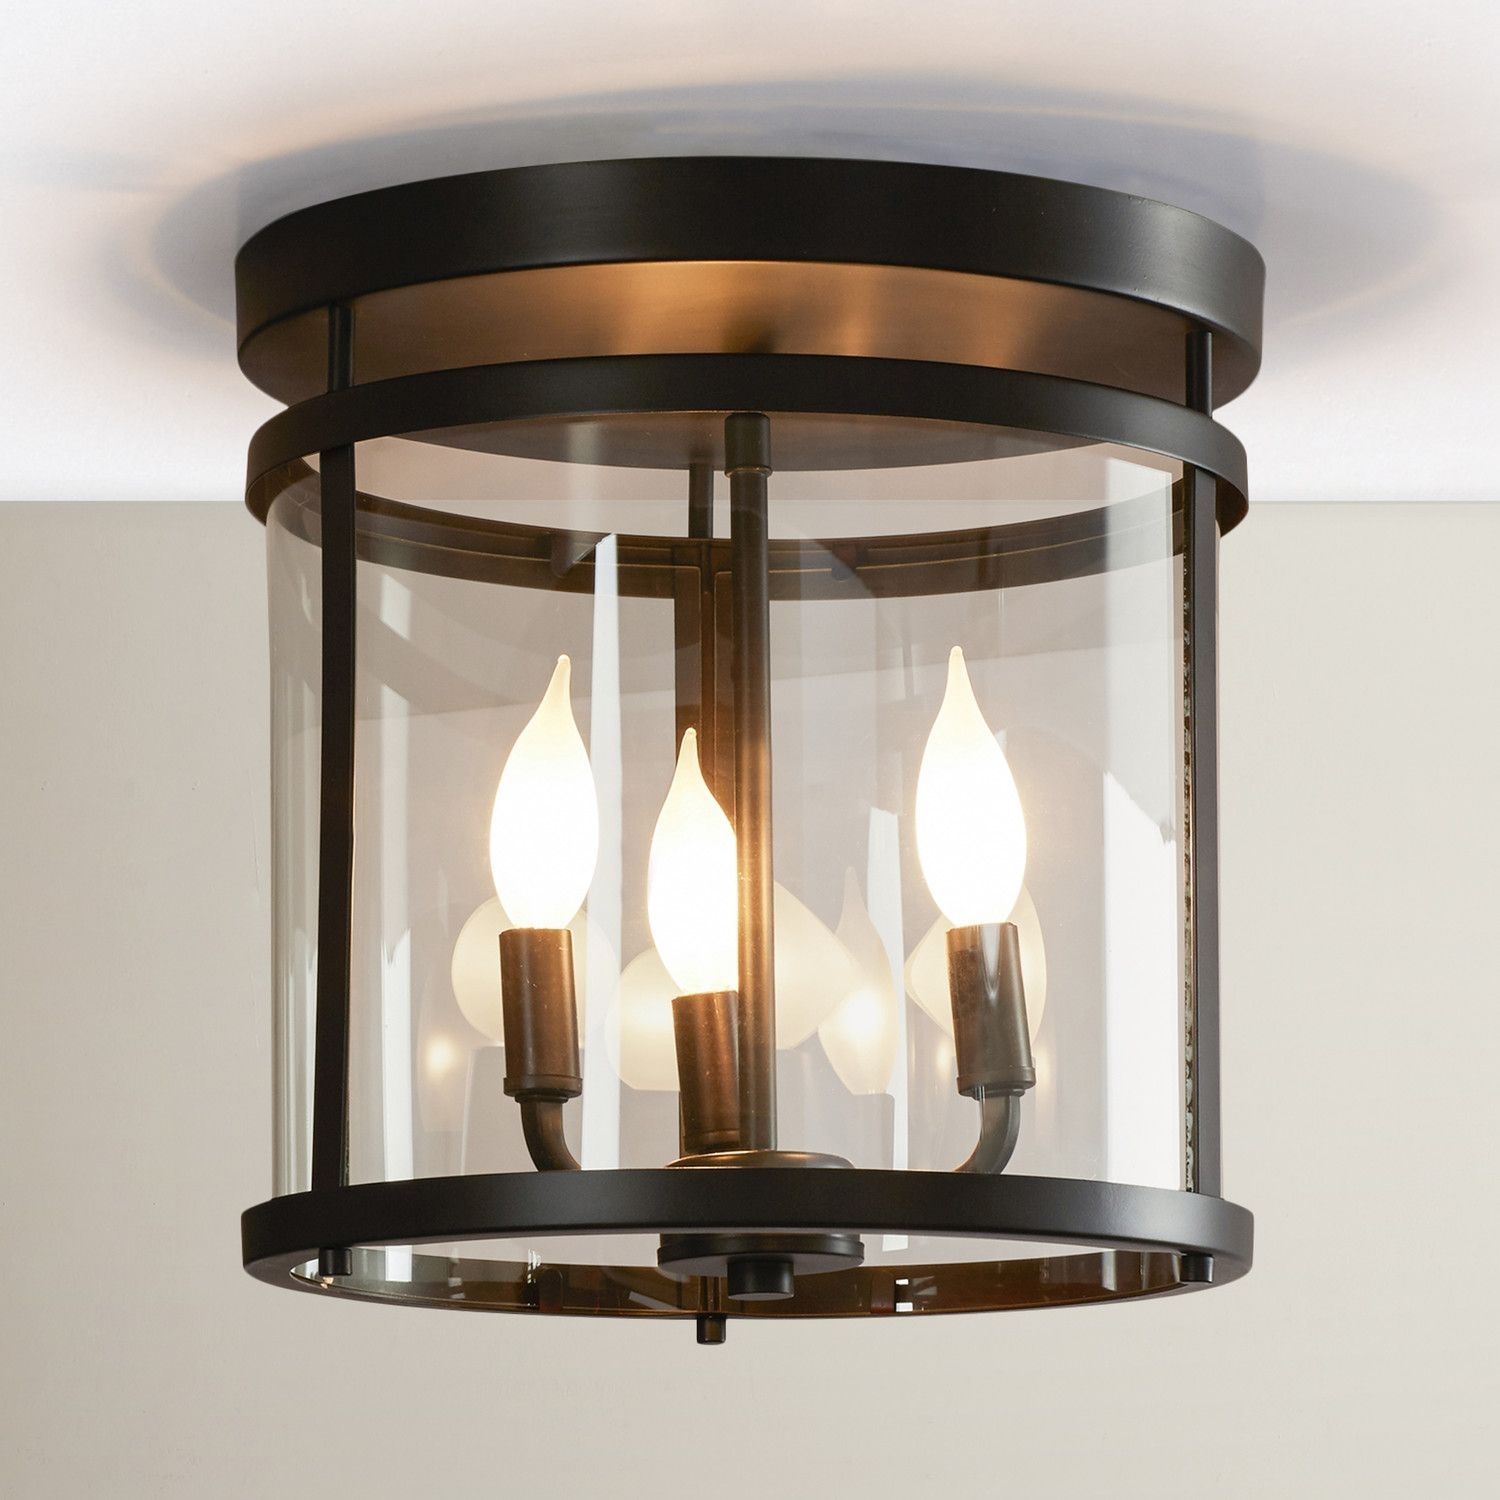 Aldergrove 3 Light Flush Mount | Lights And Room With Regard To Rustic Outdoor Lighting At Wayfair (View 8 of 15)